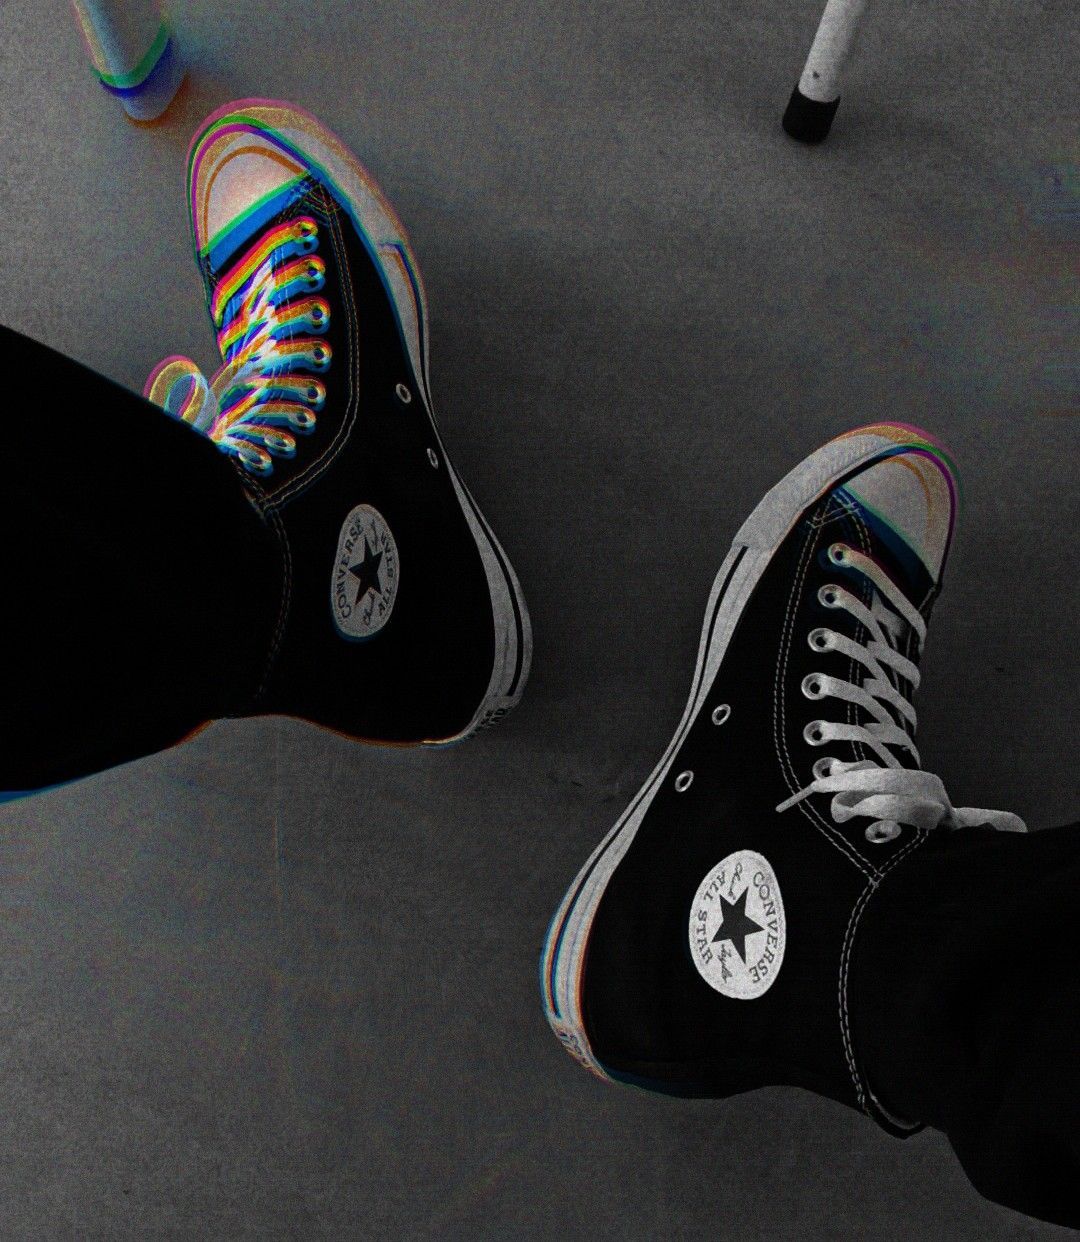 Two converse shoes, one with rainbow laces and the other with black laces - Converse